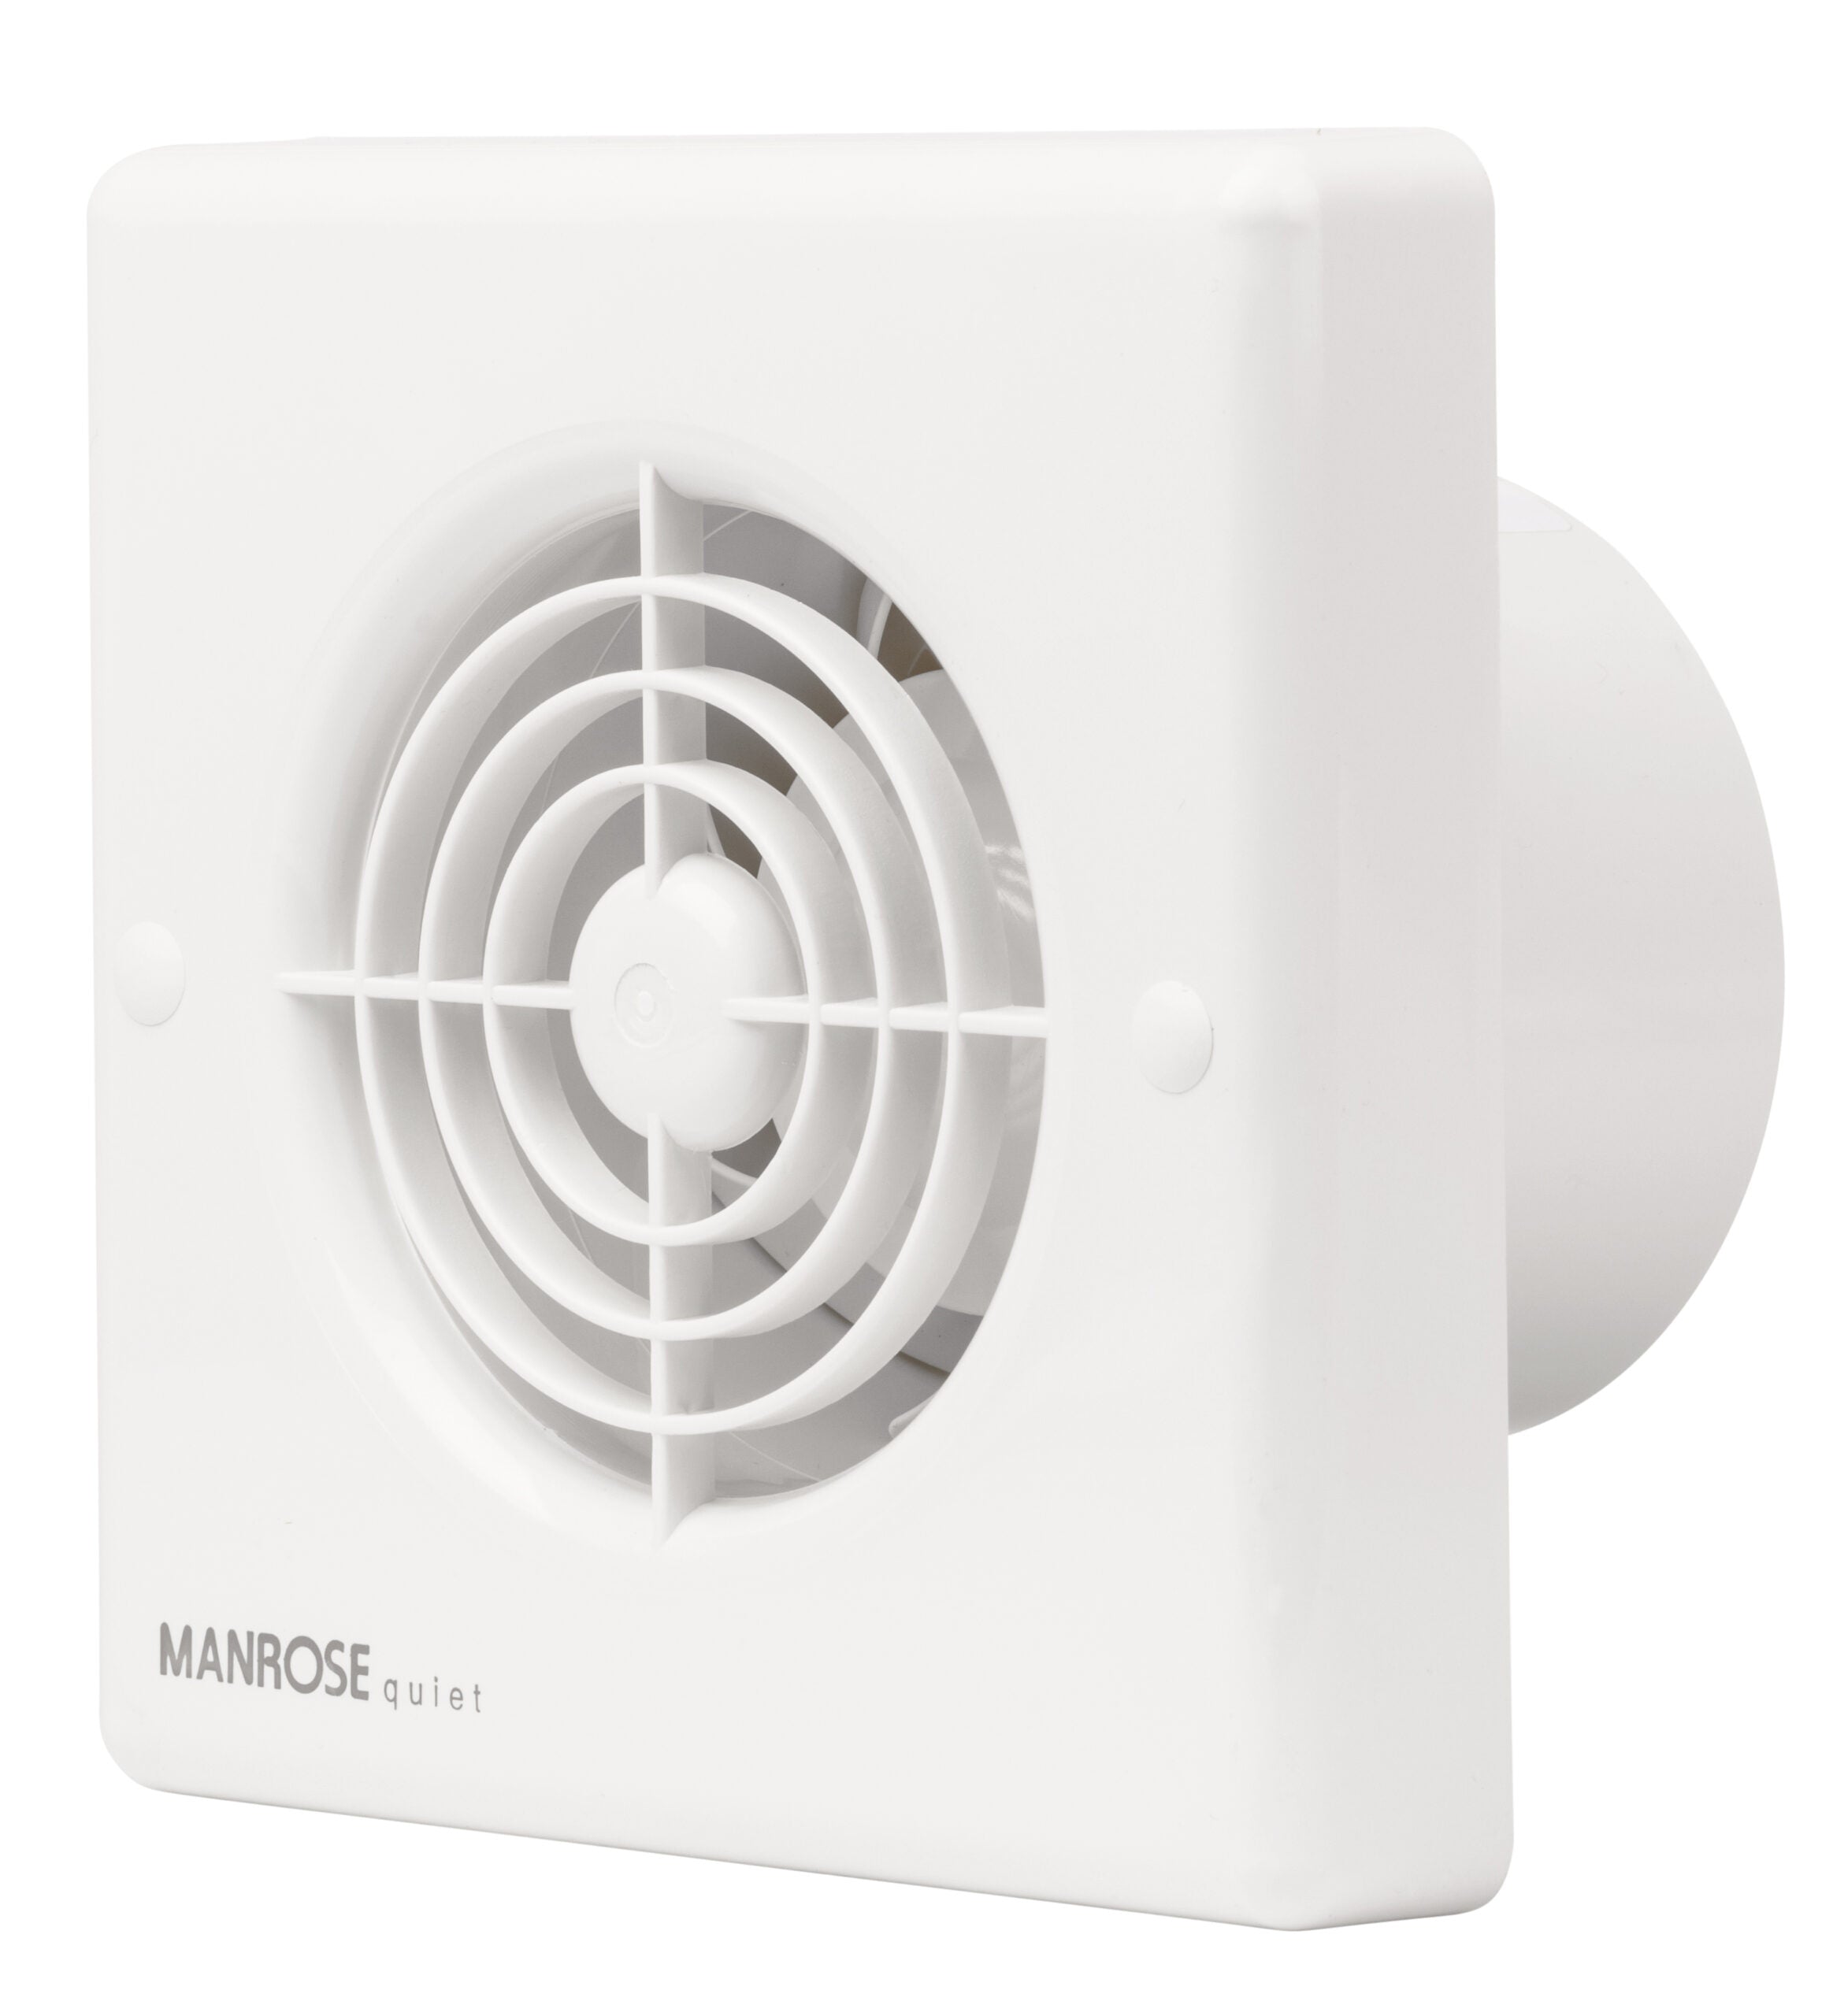 Image of a Manrose qf100t extractor fan on a white background